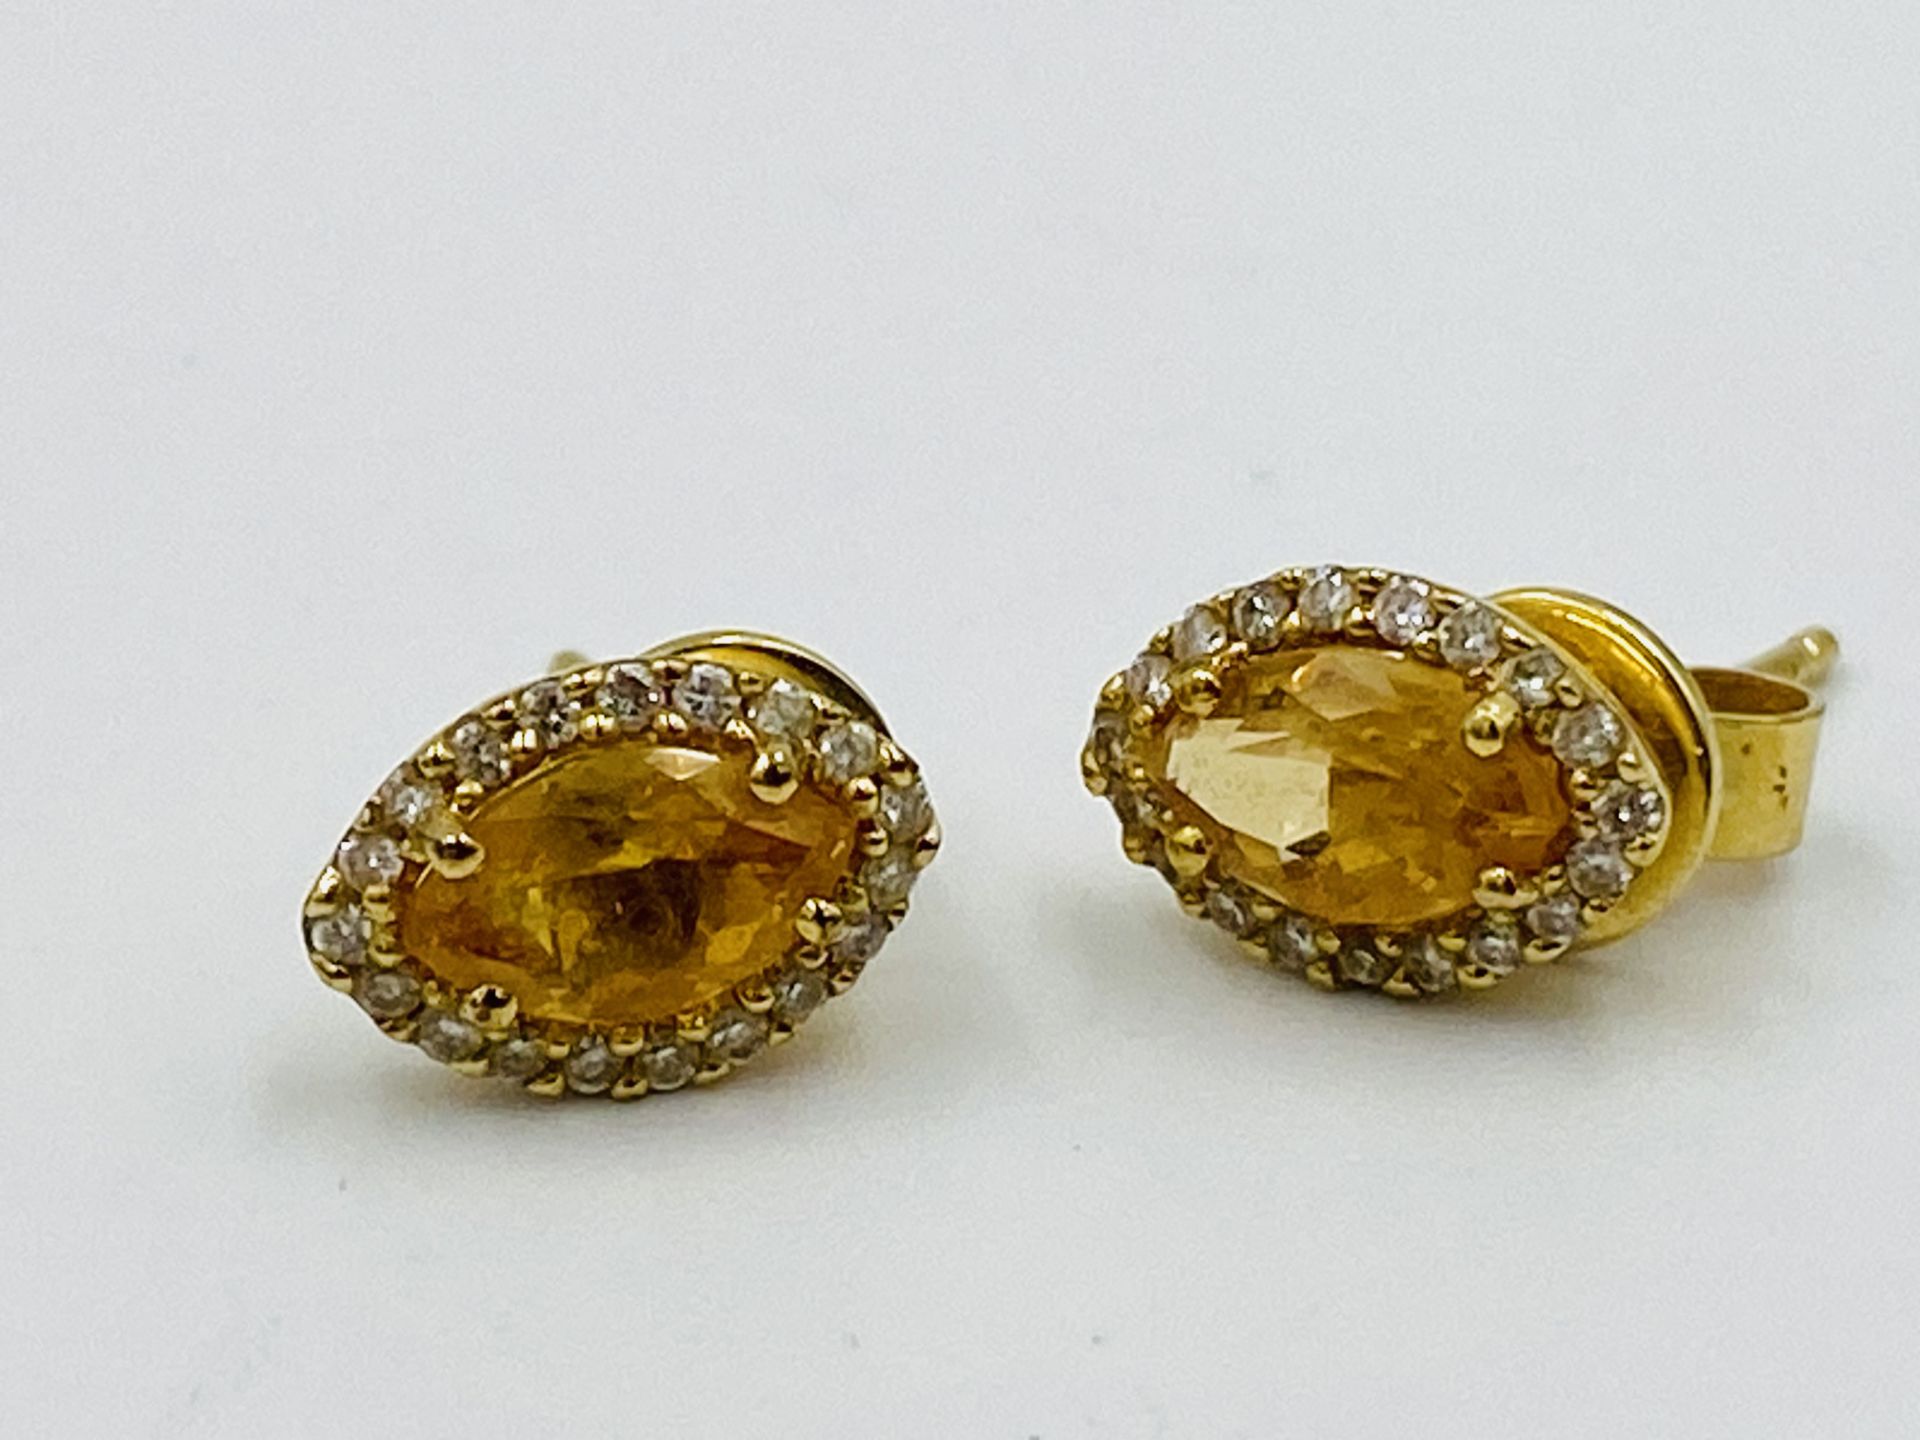 Pair of 18ct gold, citrine and diamond earrings